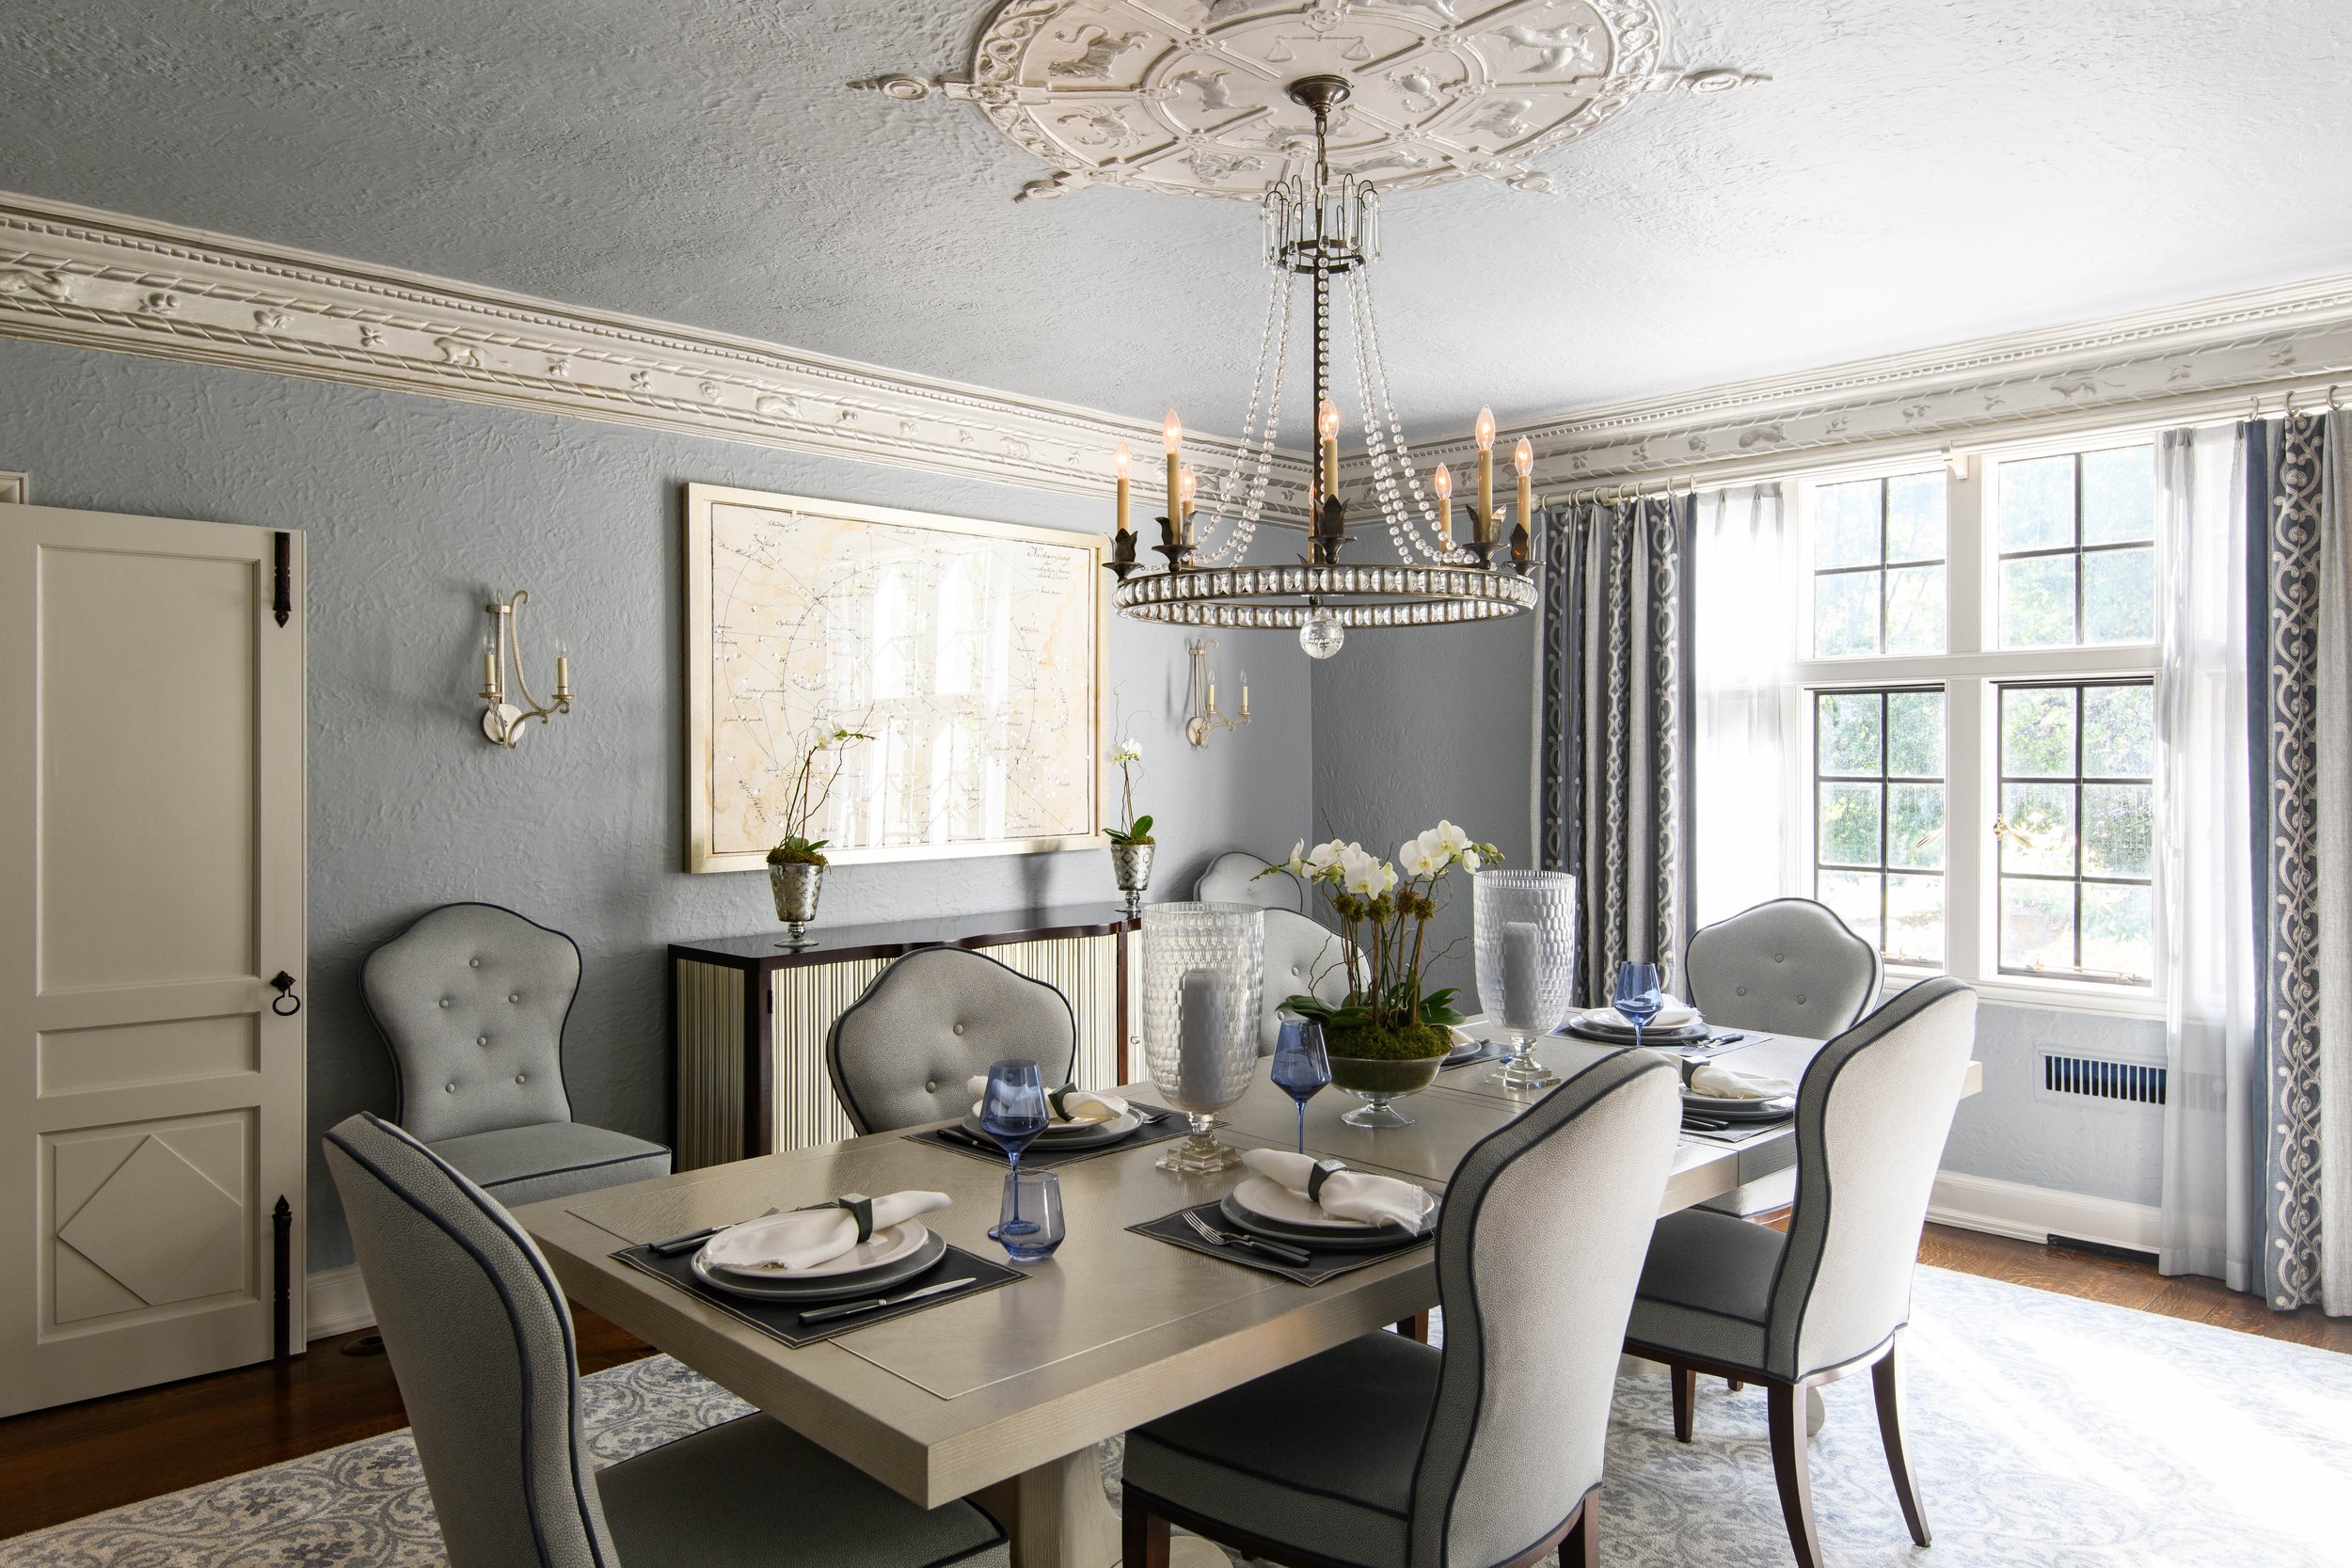 7-dining-space-classy-table-chic-decor-westechester-rinfret-interior-designs.jpg